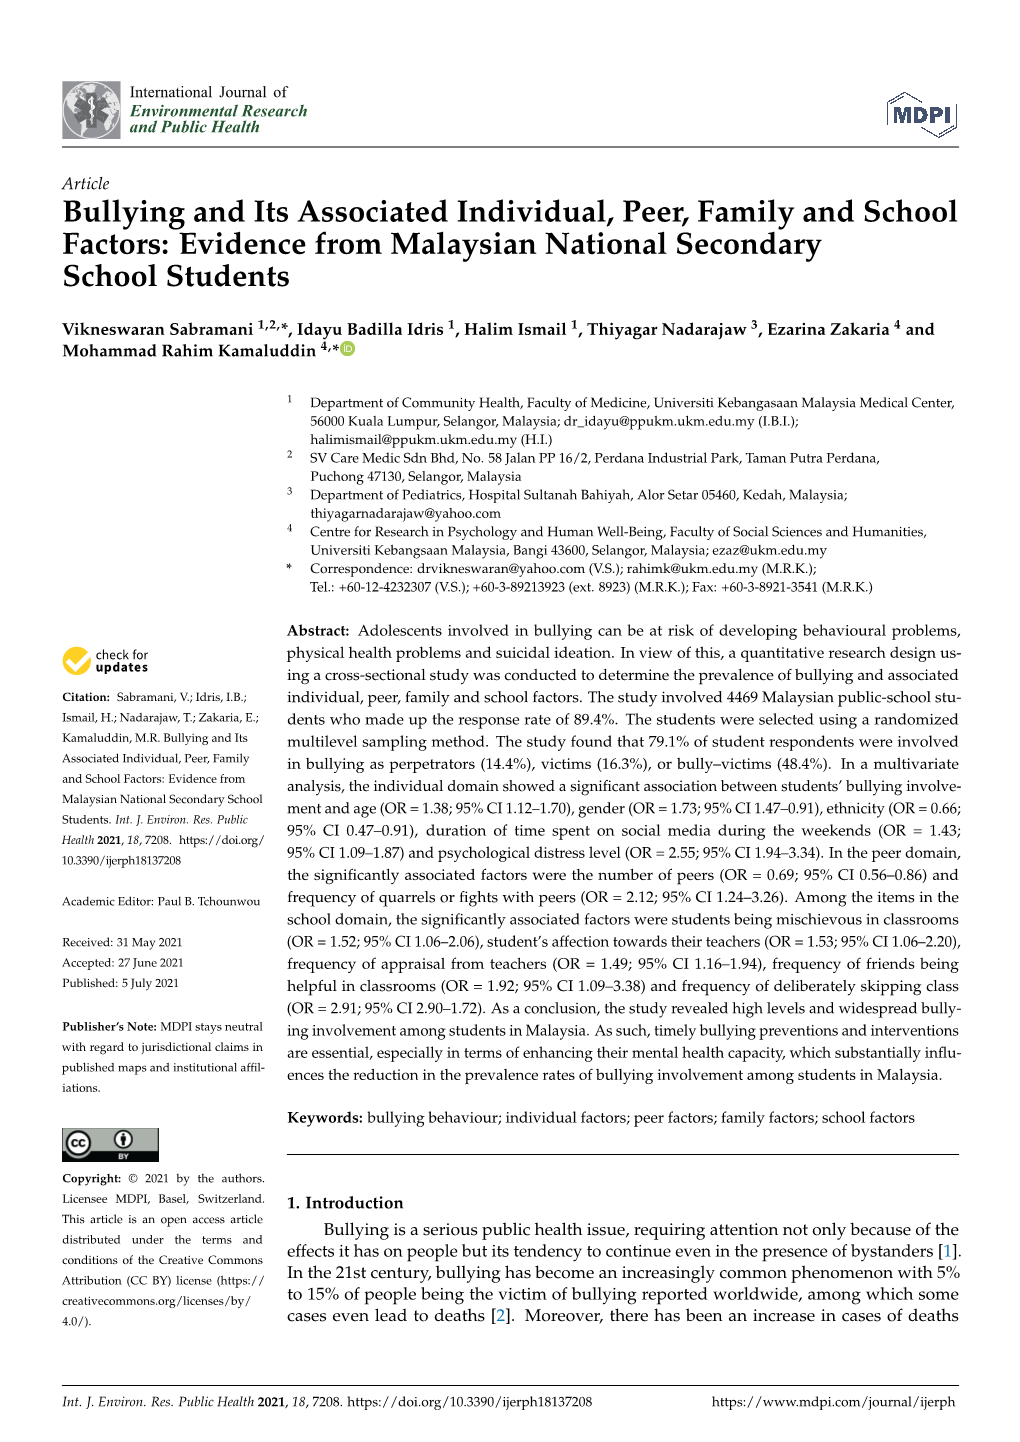 Bullying and Its Associated Individual, Peer, Family and School Factors: Evidence from Malaysian National Secondary School Students